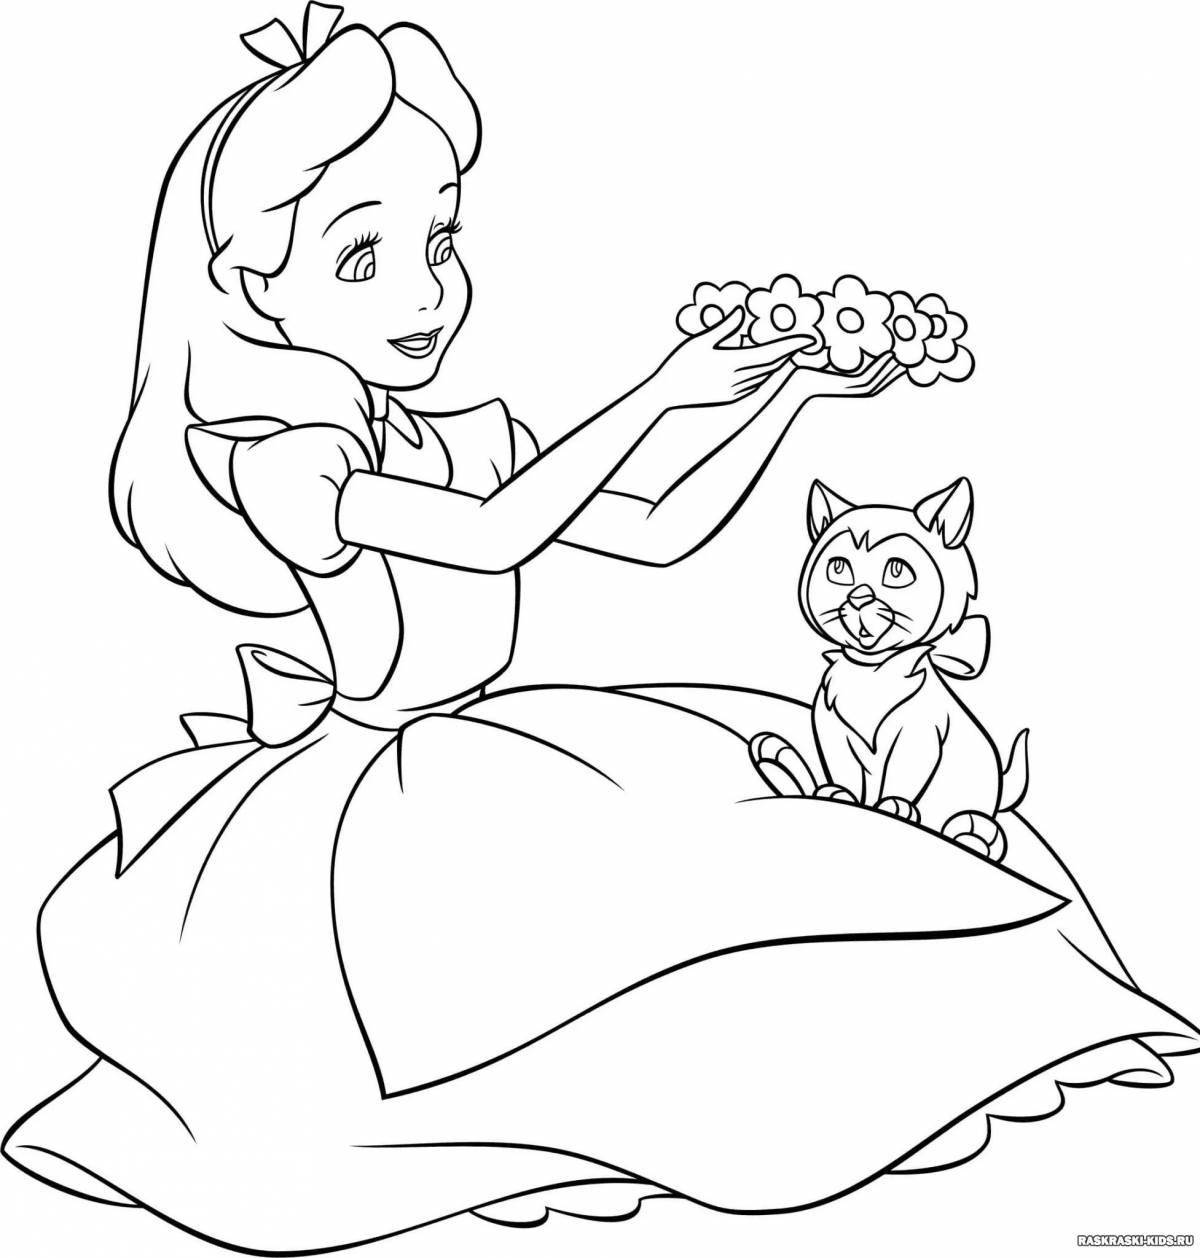 Fabulous alice in wonderland coloring page